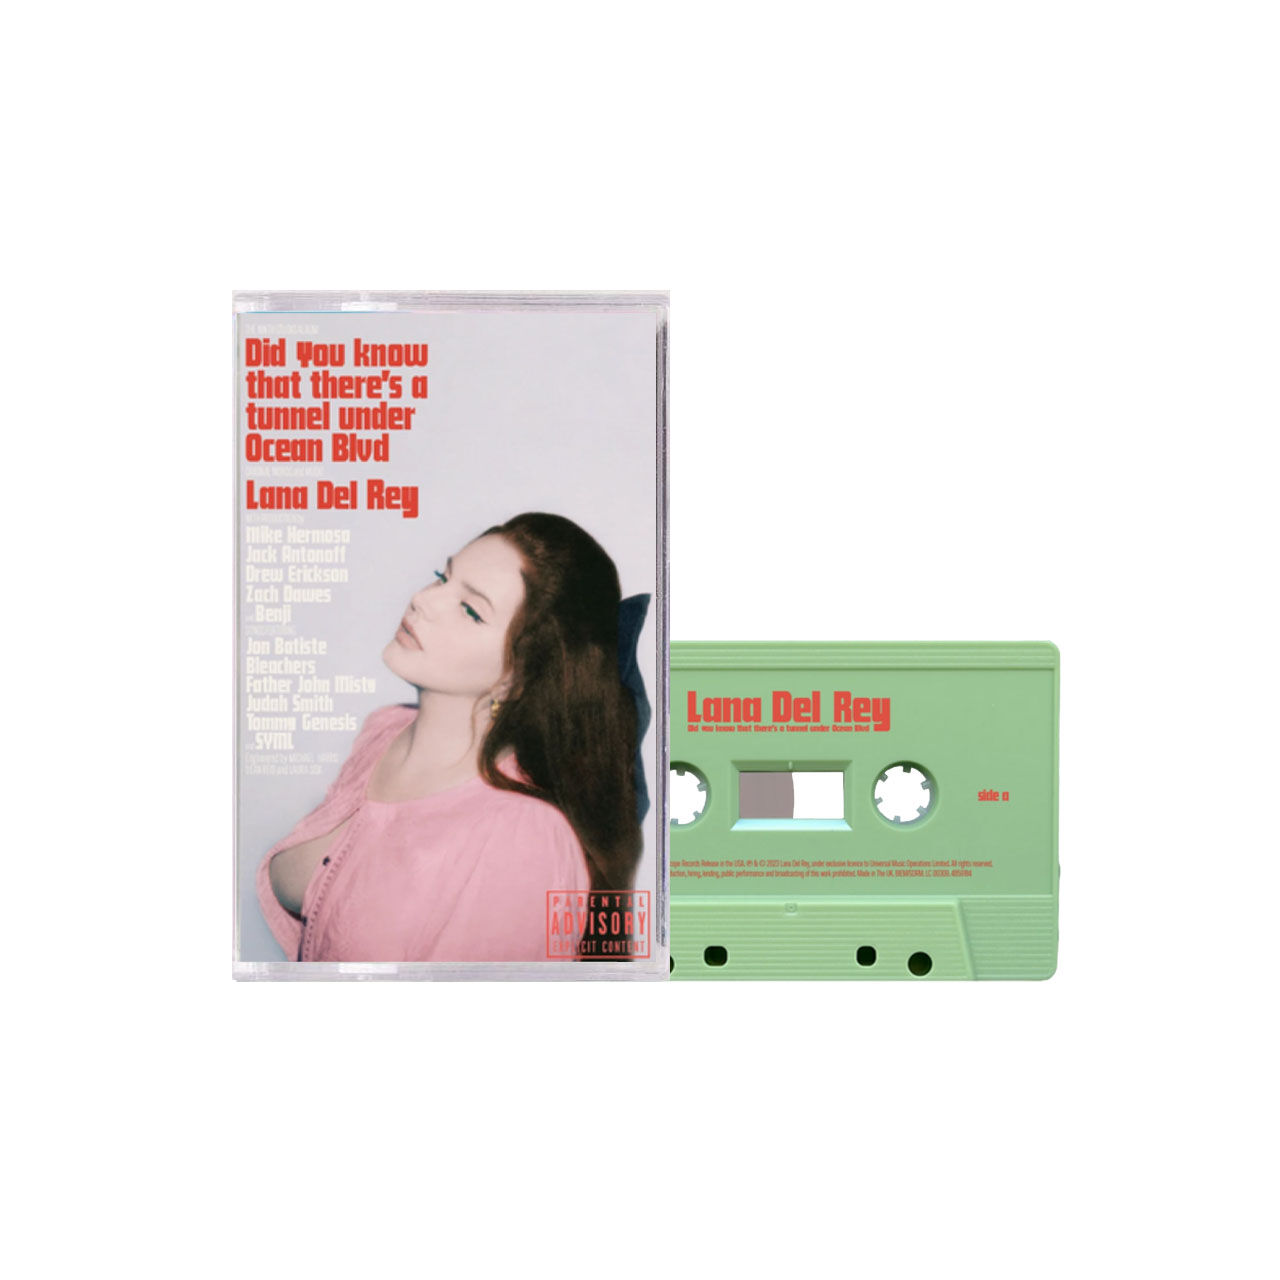 LANA DEL REY Did You Know That There’s a Tunnel Under Ocean Blvd Cover 3 Green Jewel Case Cassette